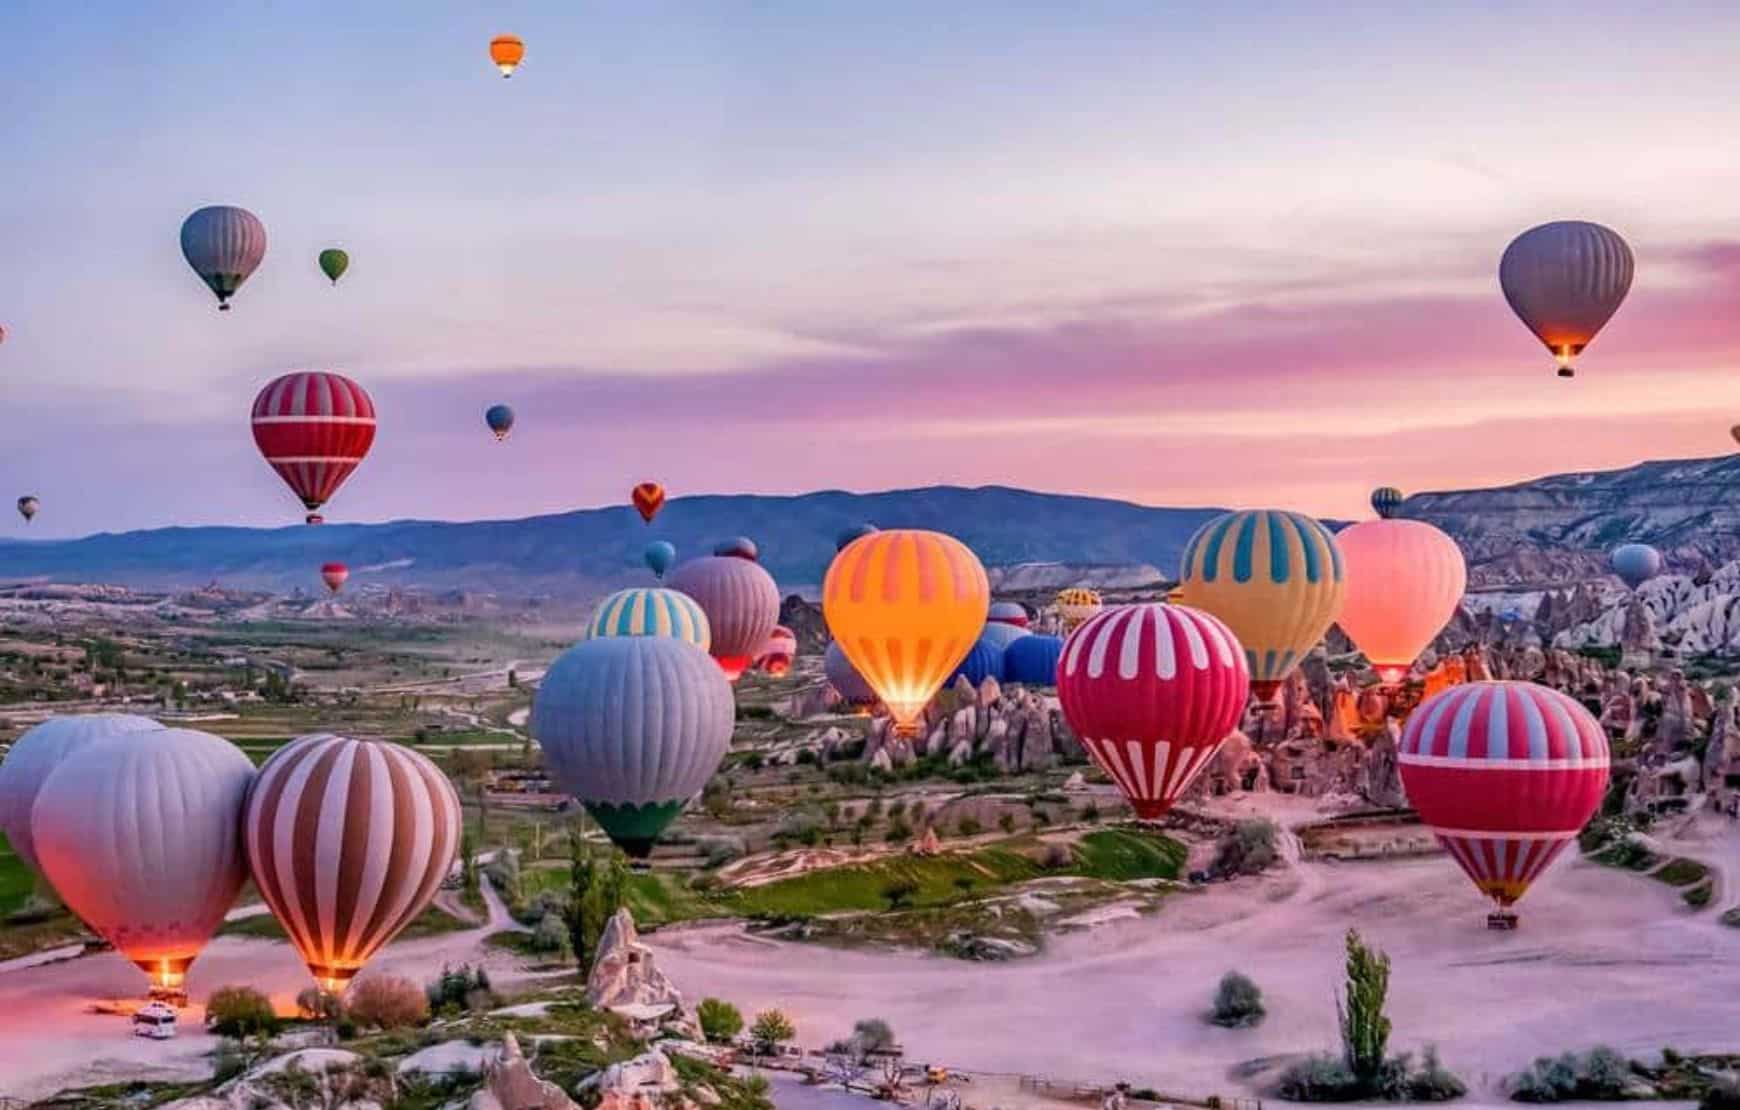 Take Hot Air Balloon Ride with our Two Days Cappadocia Tour from Istanbul